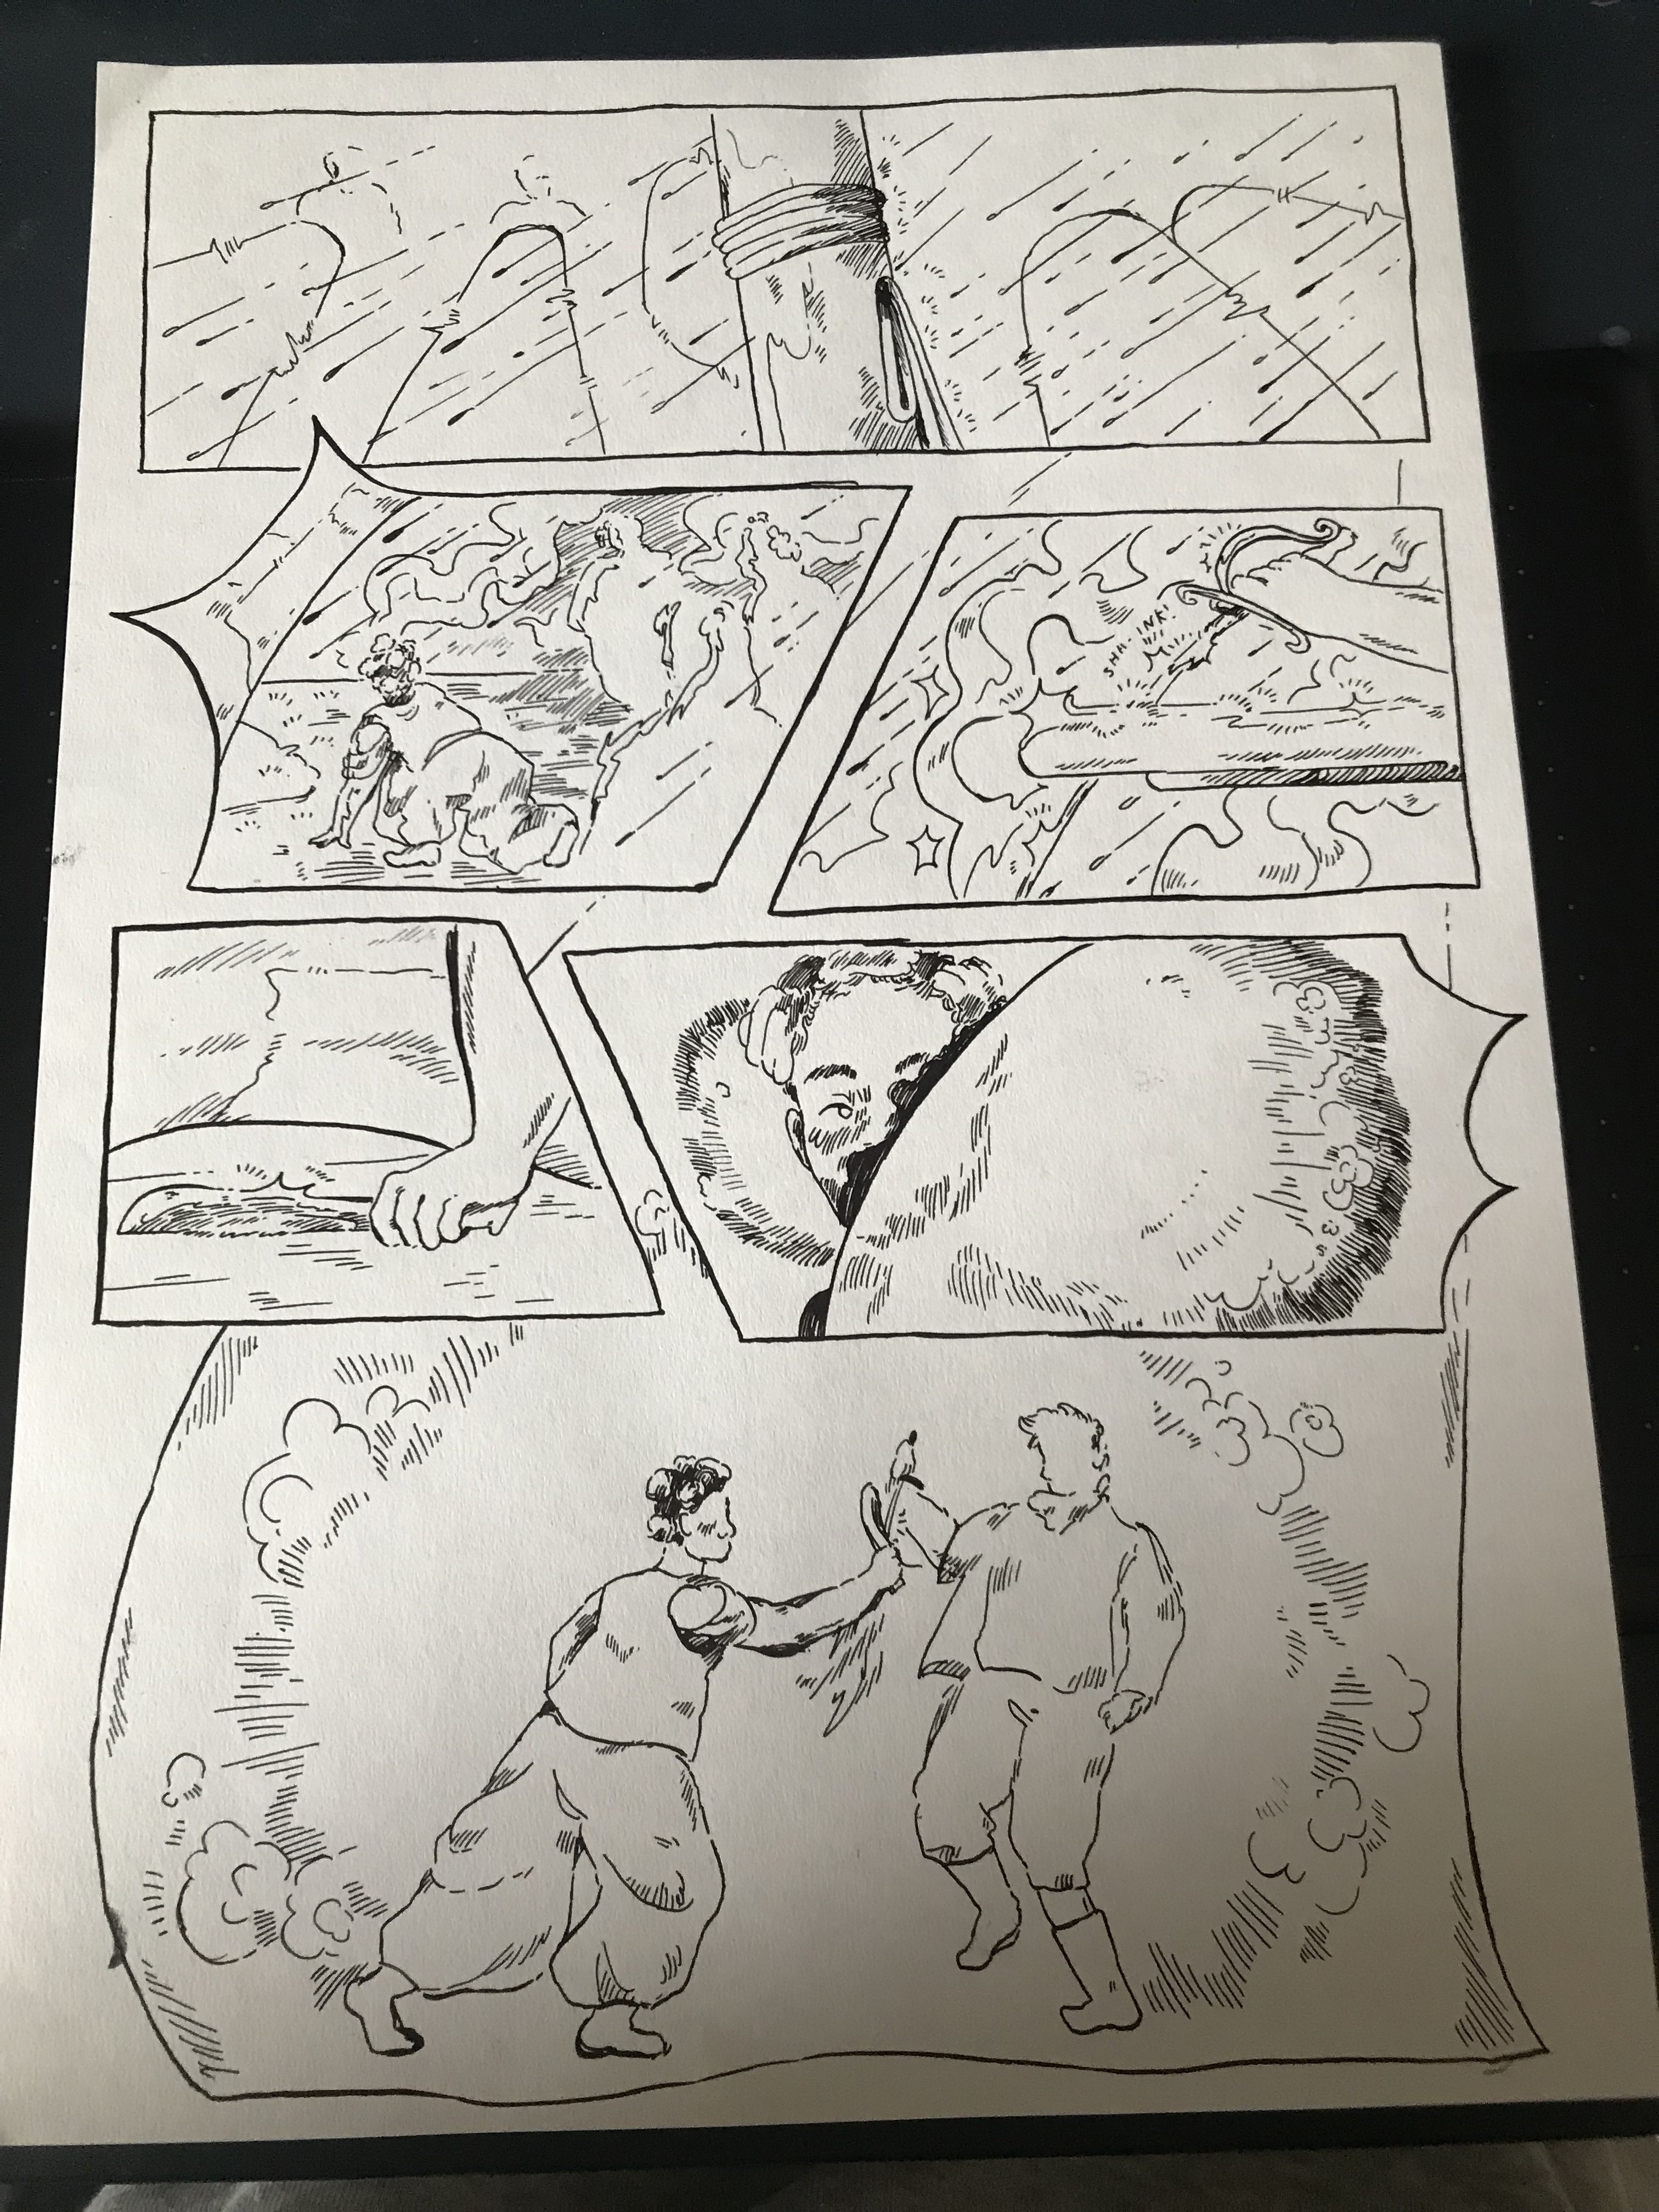 A fully inked comic page, with no text.